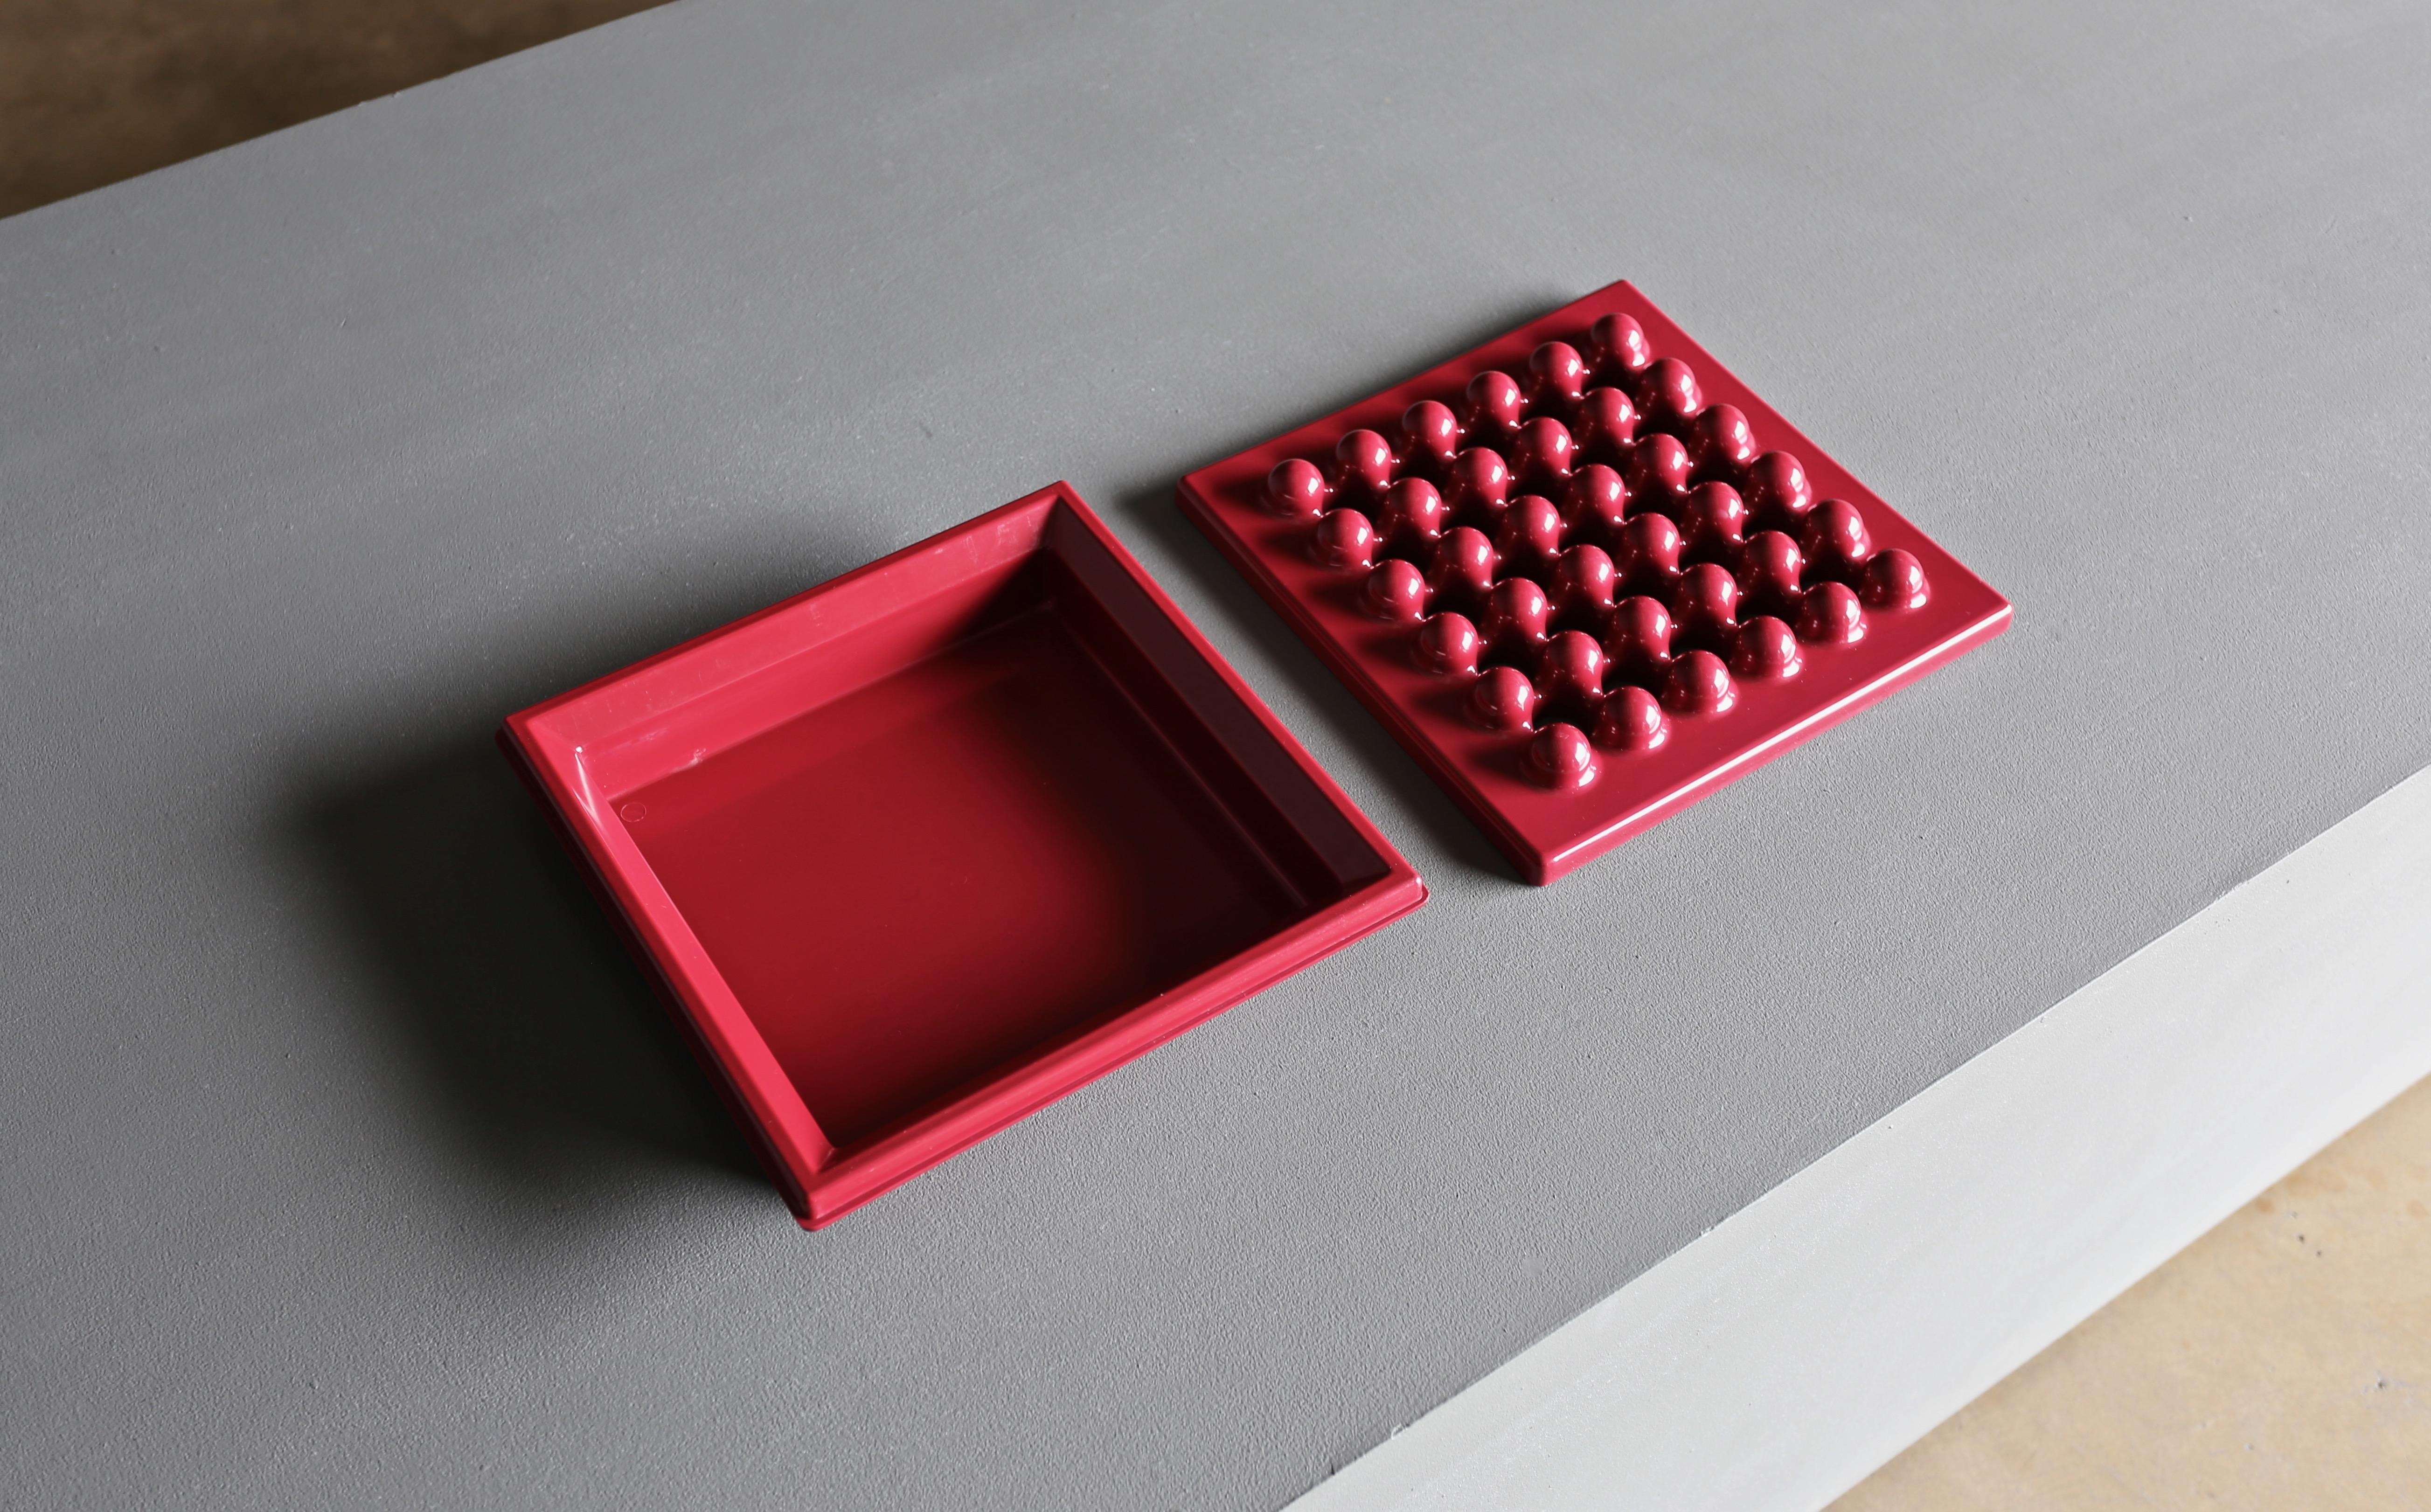 Plastic Ettore Sottsass Synthesis Ashtray for Olivetti, circa 1970